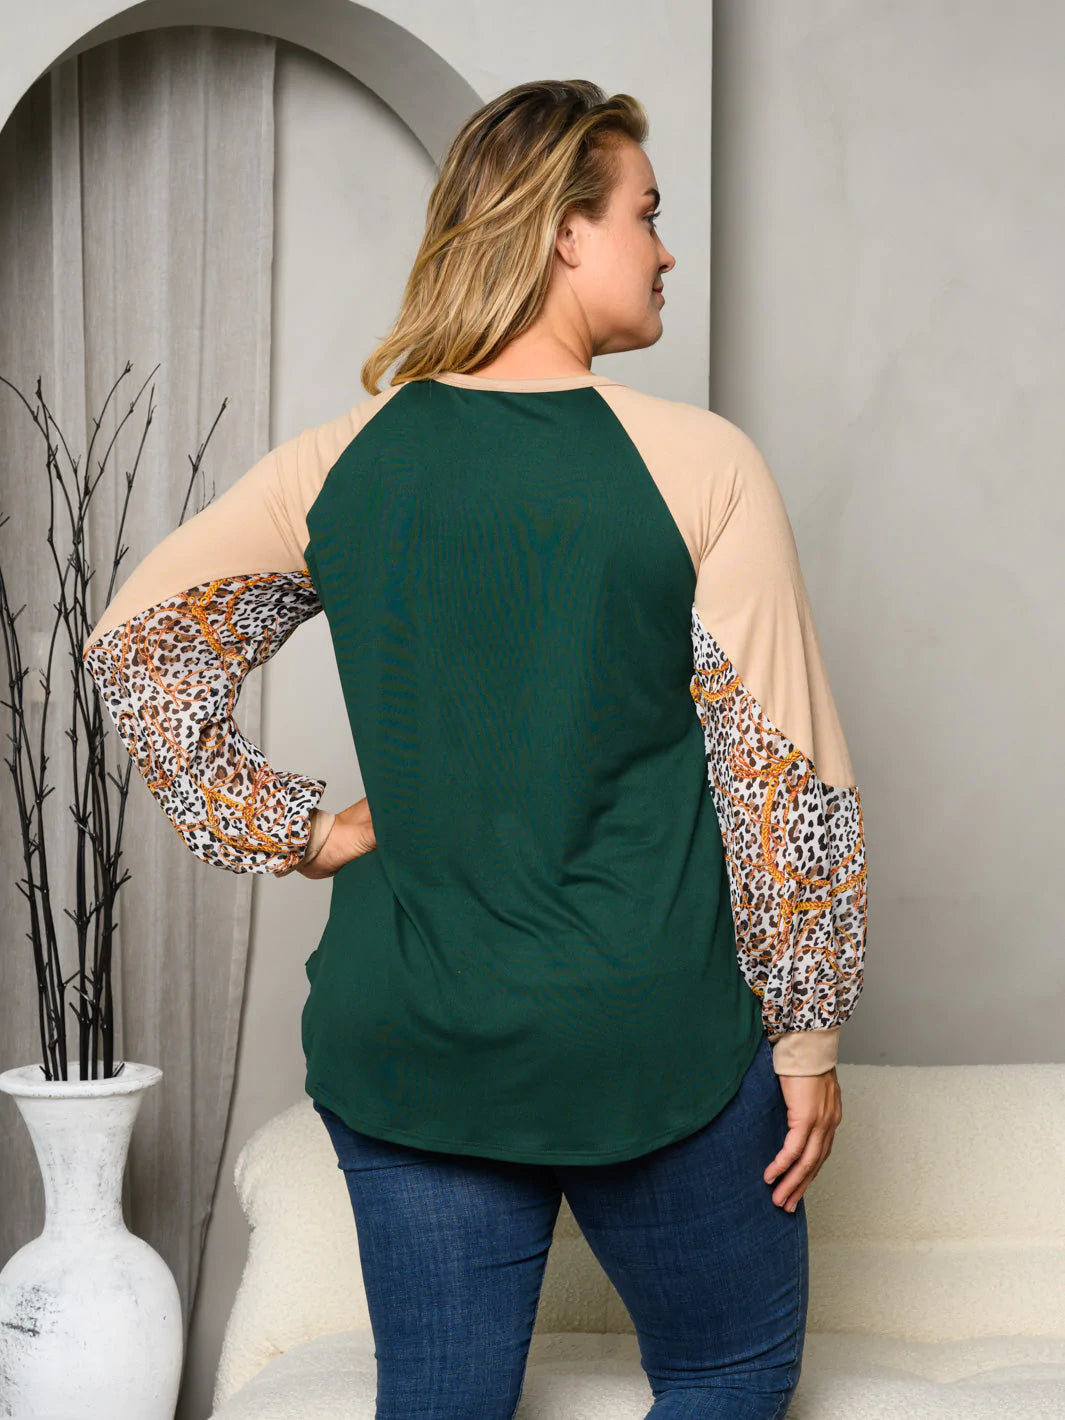 Back side view with animal print sleeves.